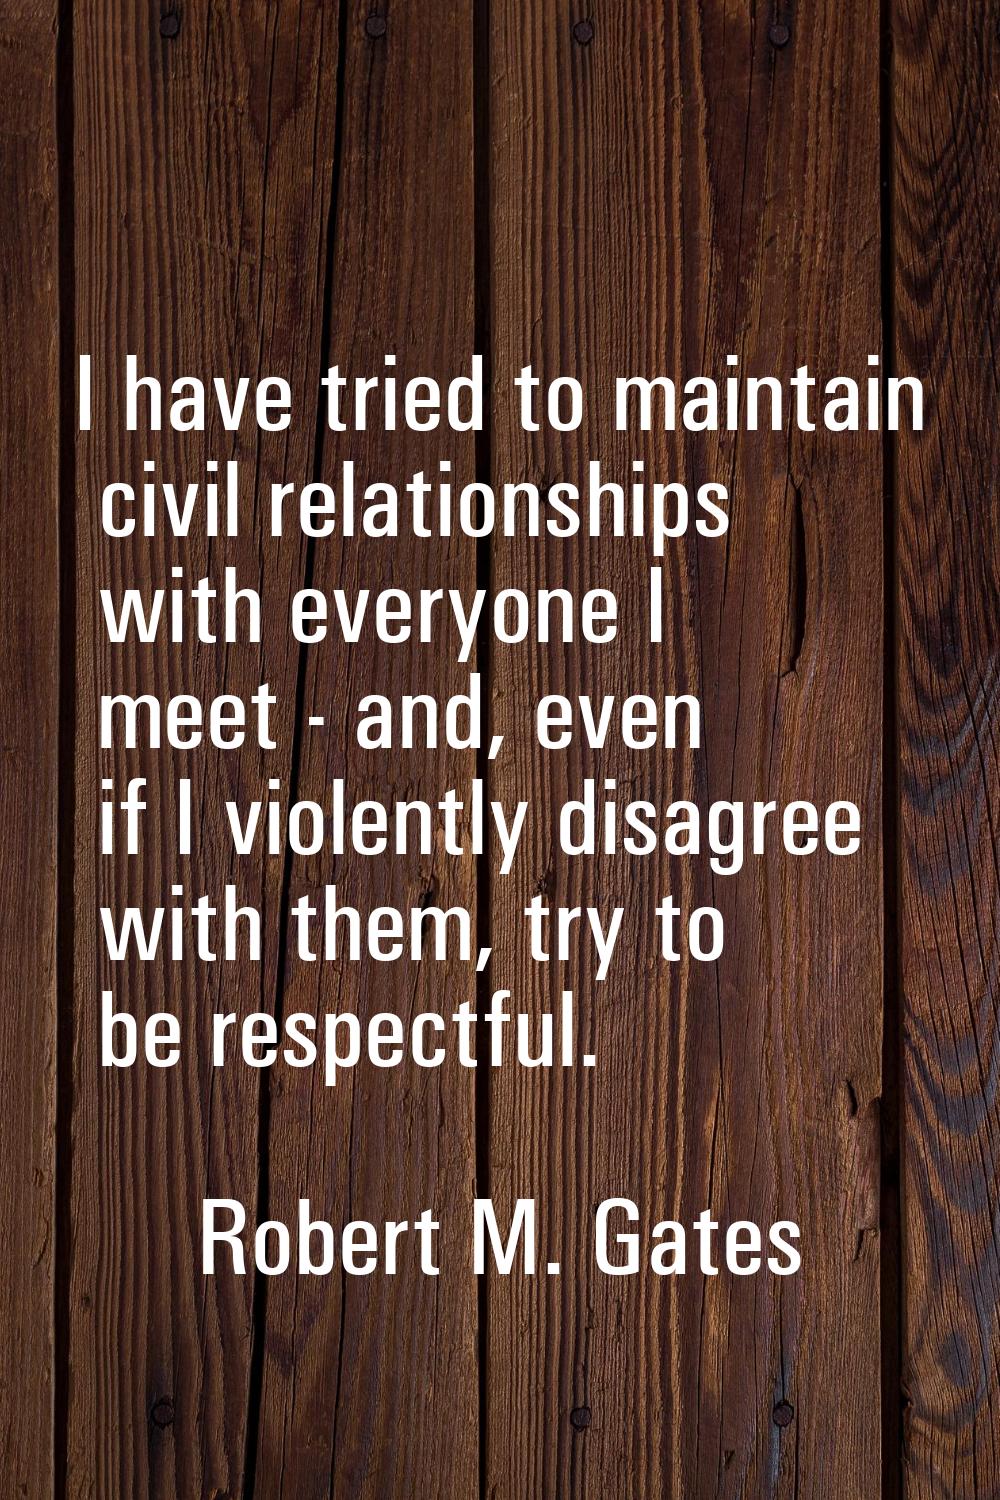 I have tried to maintain civil relationships with everyone I meet - and, even if I violently disagr